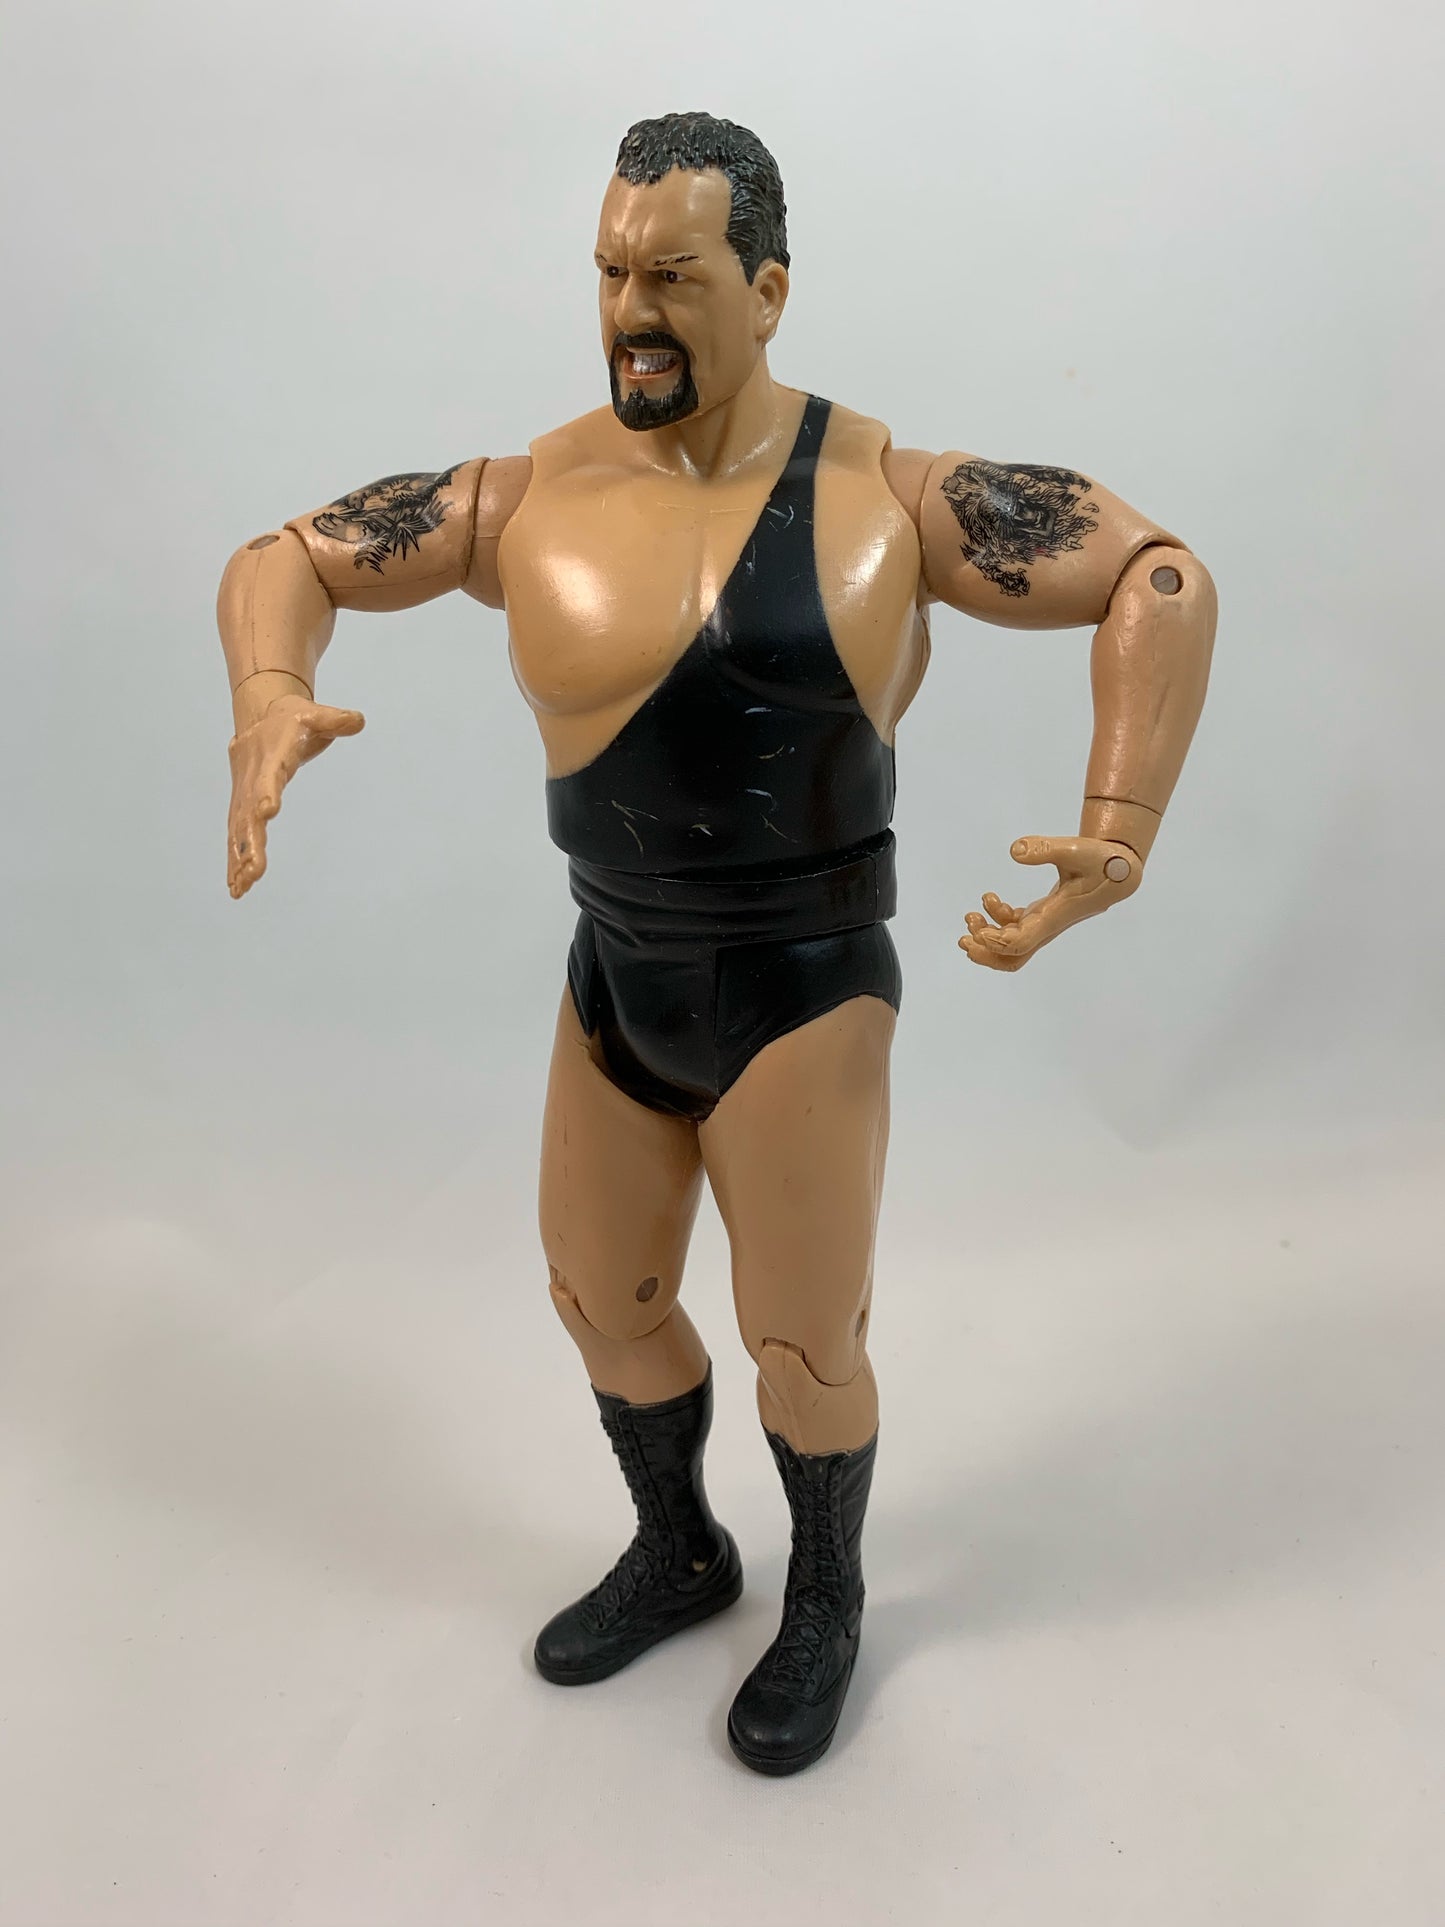 MATTEL SERIES 1 Rare WWE BIG SHOW Commemorative Belt LIMITED EDITION 1 of 1000 - Loose Action Figure